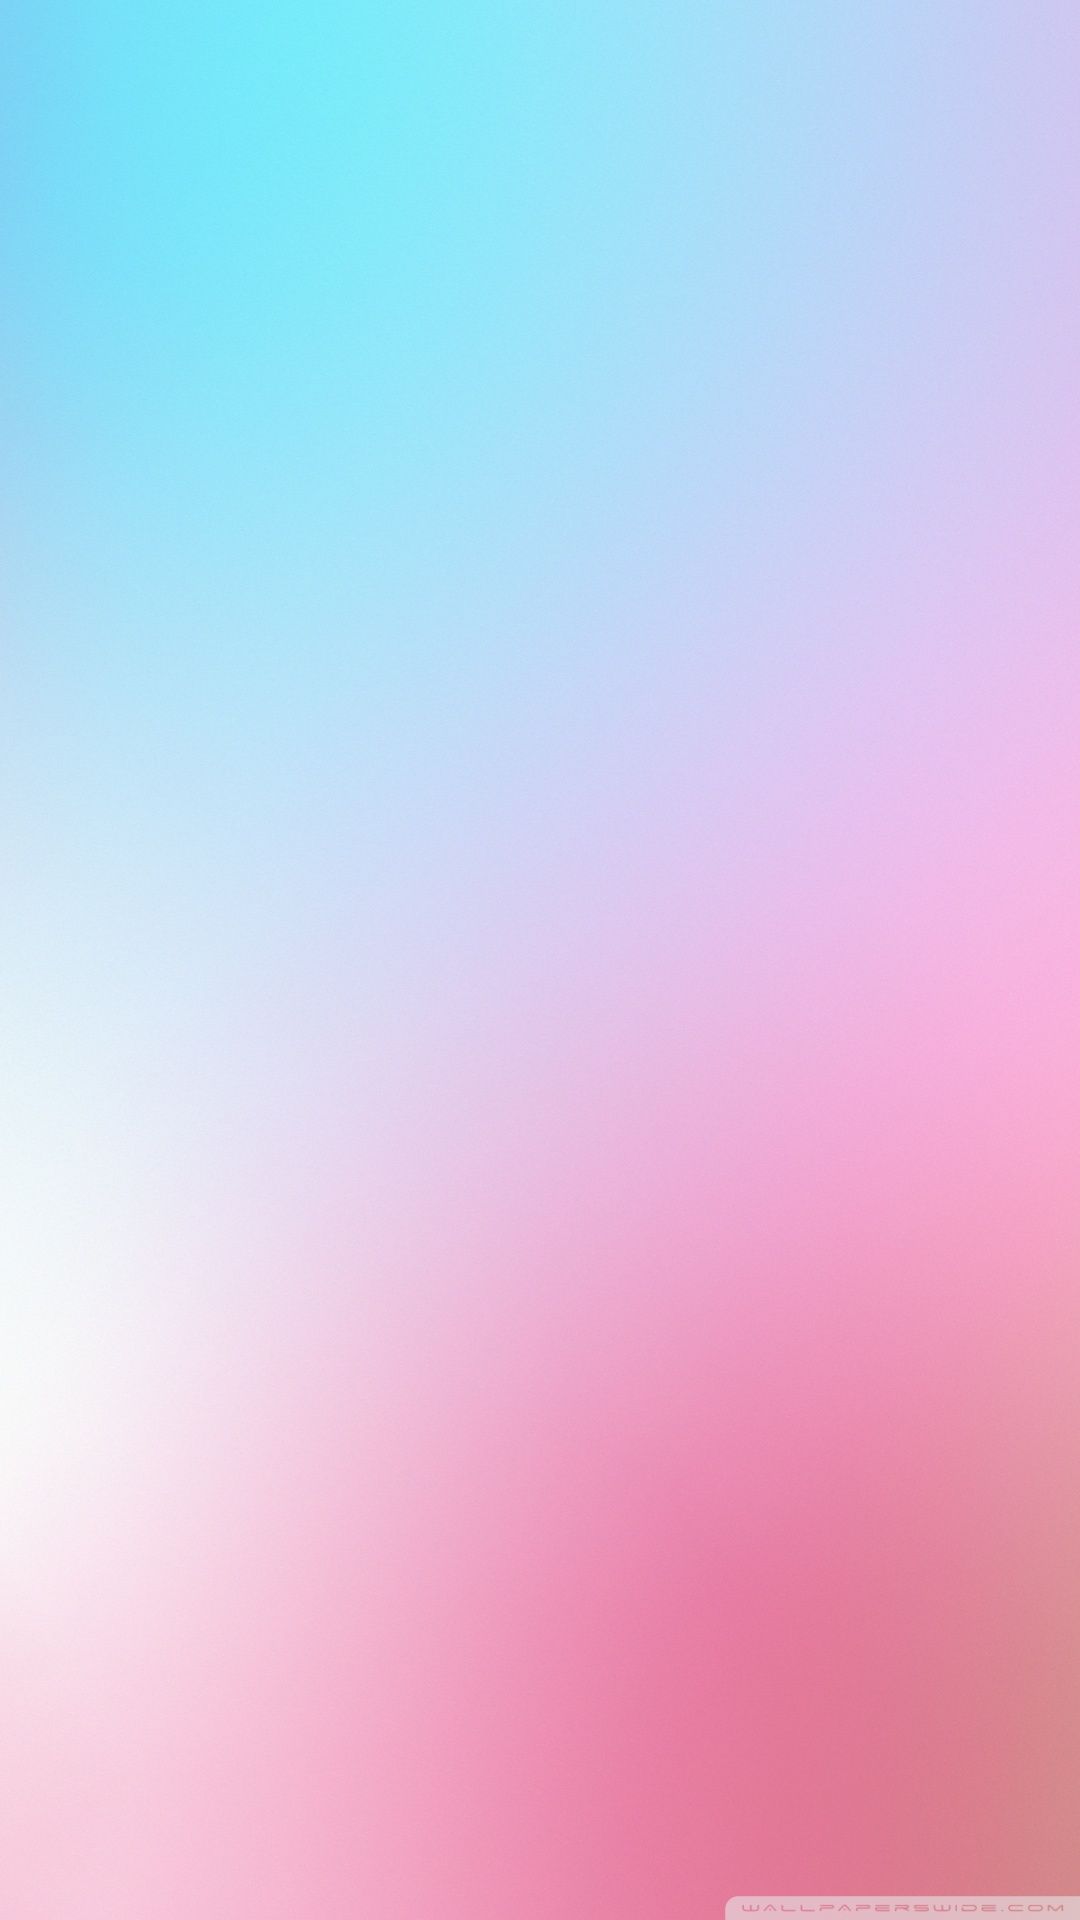 A pink and blue background with the words 'hello' - Blurry